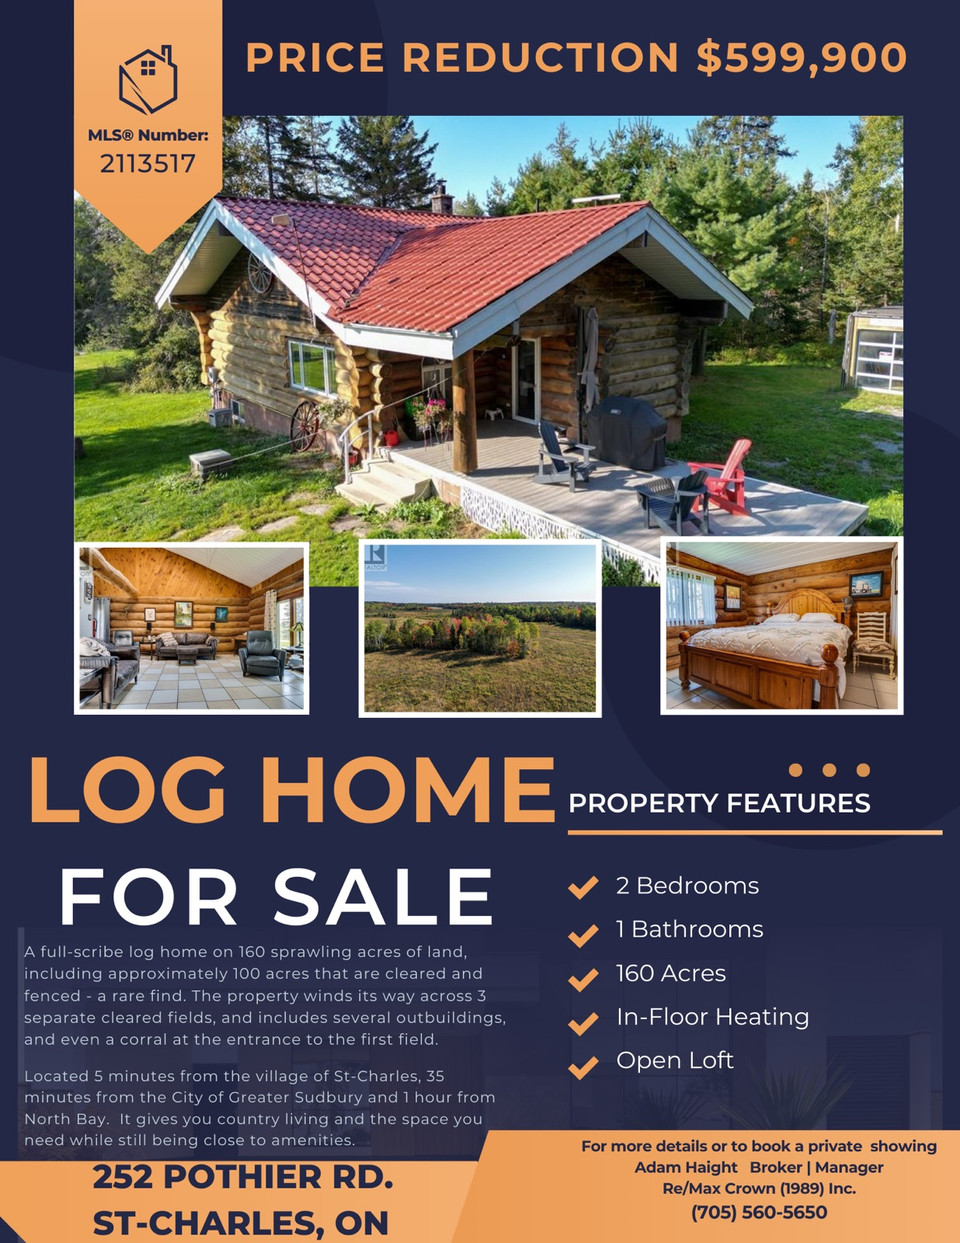 Log Home with 160 acres - St. Charles, Ontario in Houses for Sale in North Bay